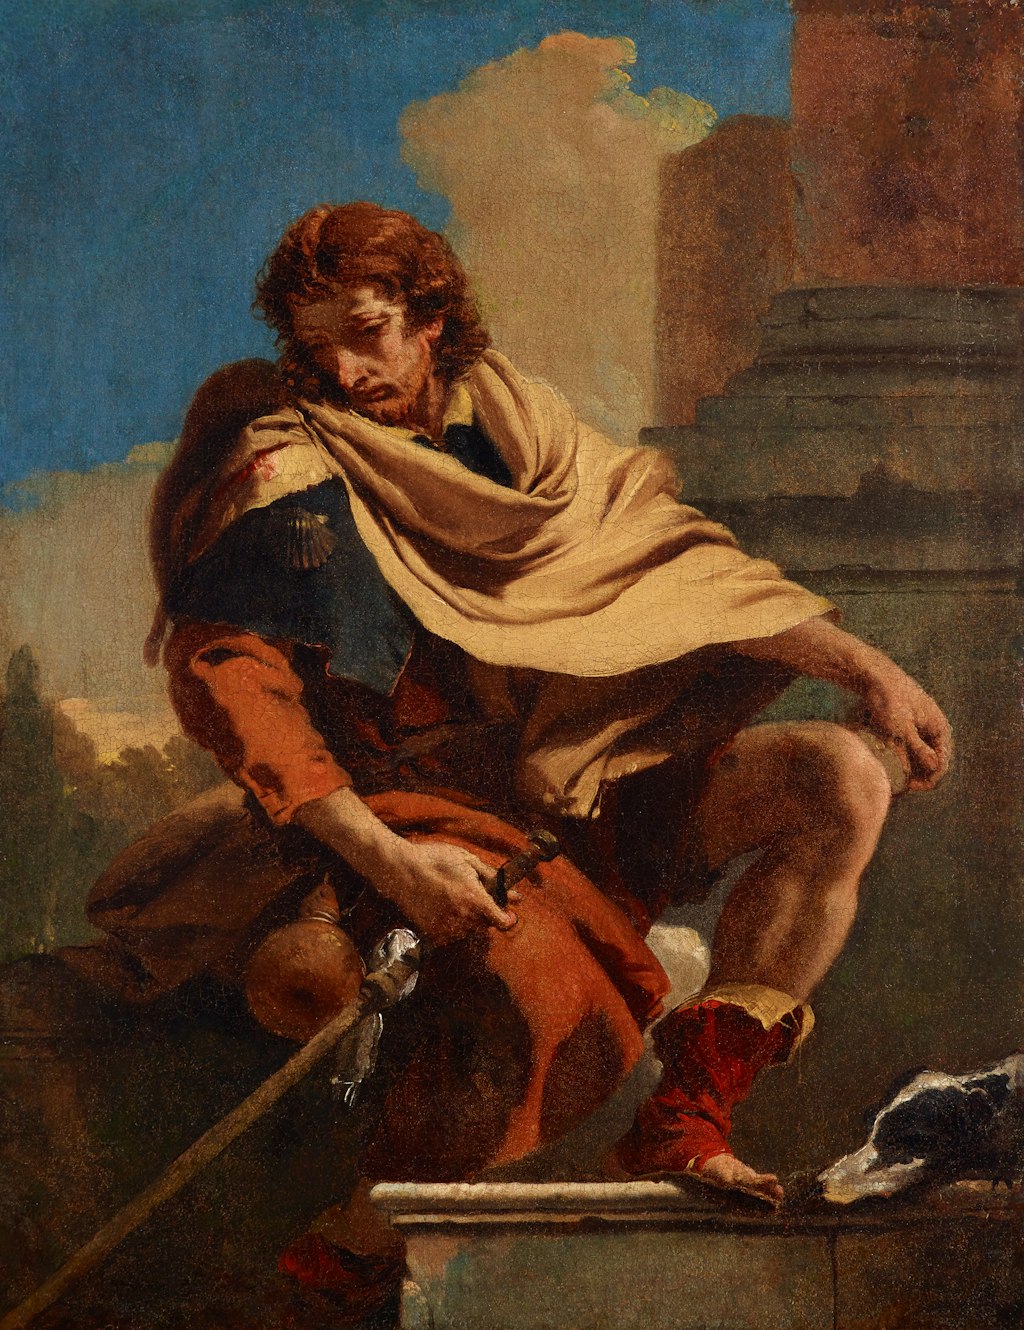 A person with a cloak around their shoulders, holding a staff, sits outside a building, with a dog at their foot.